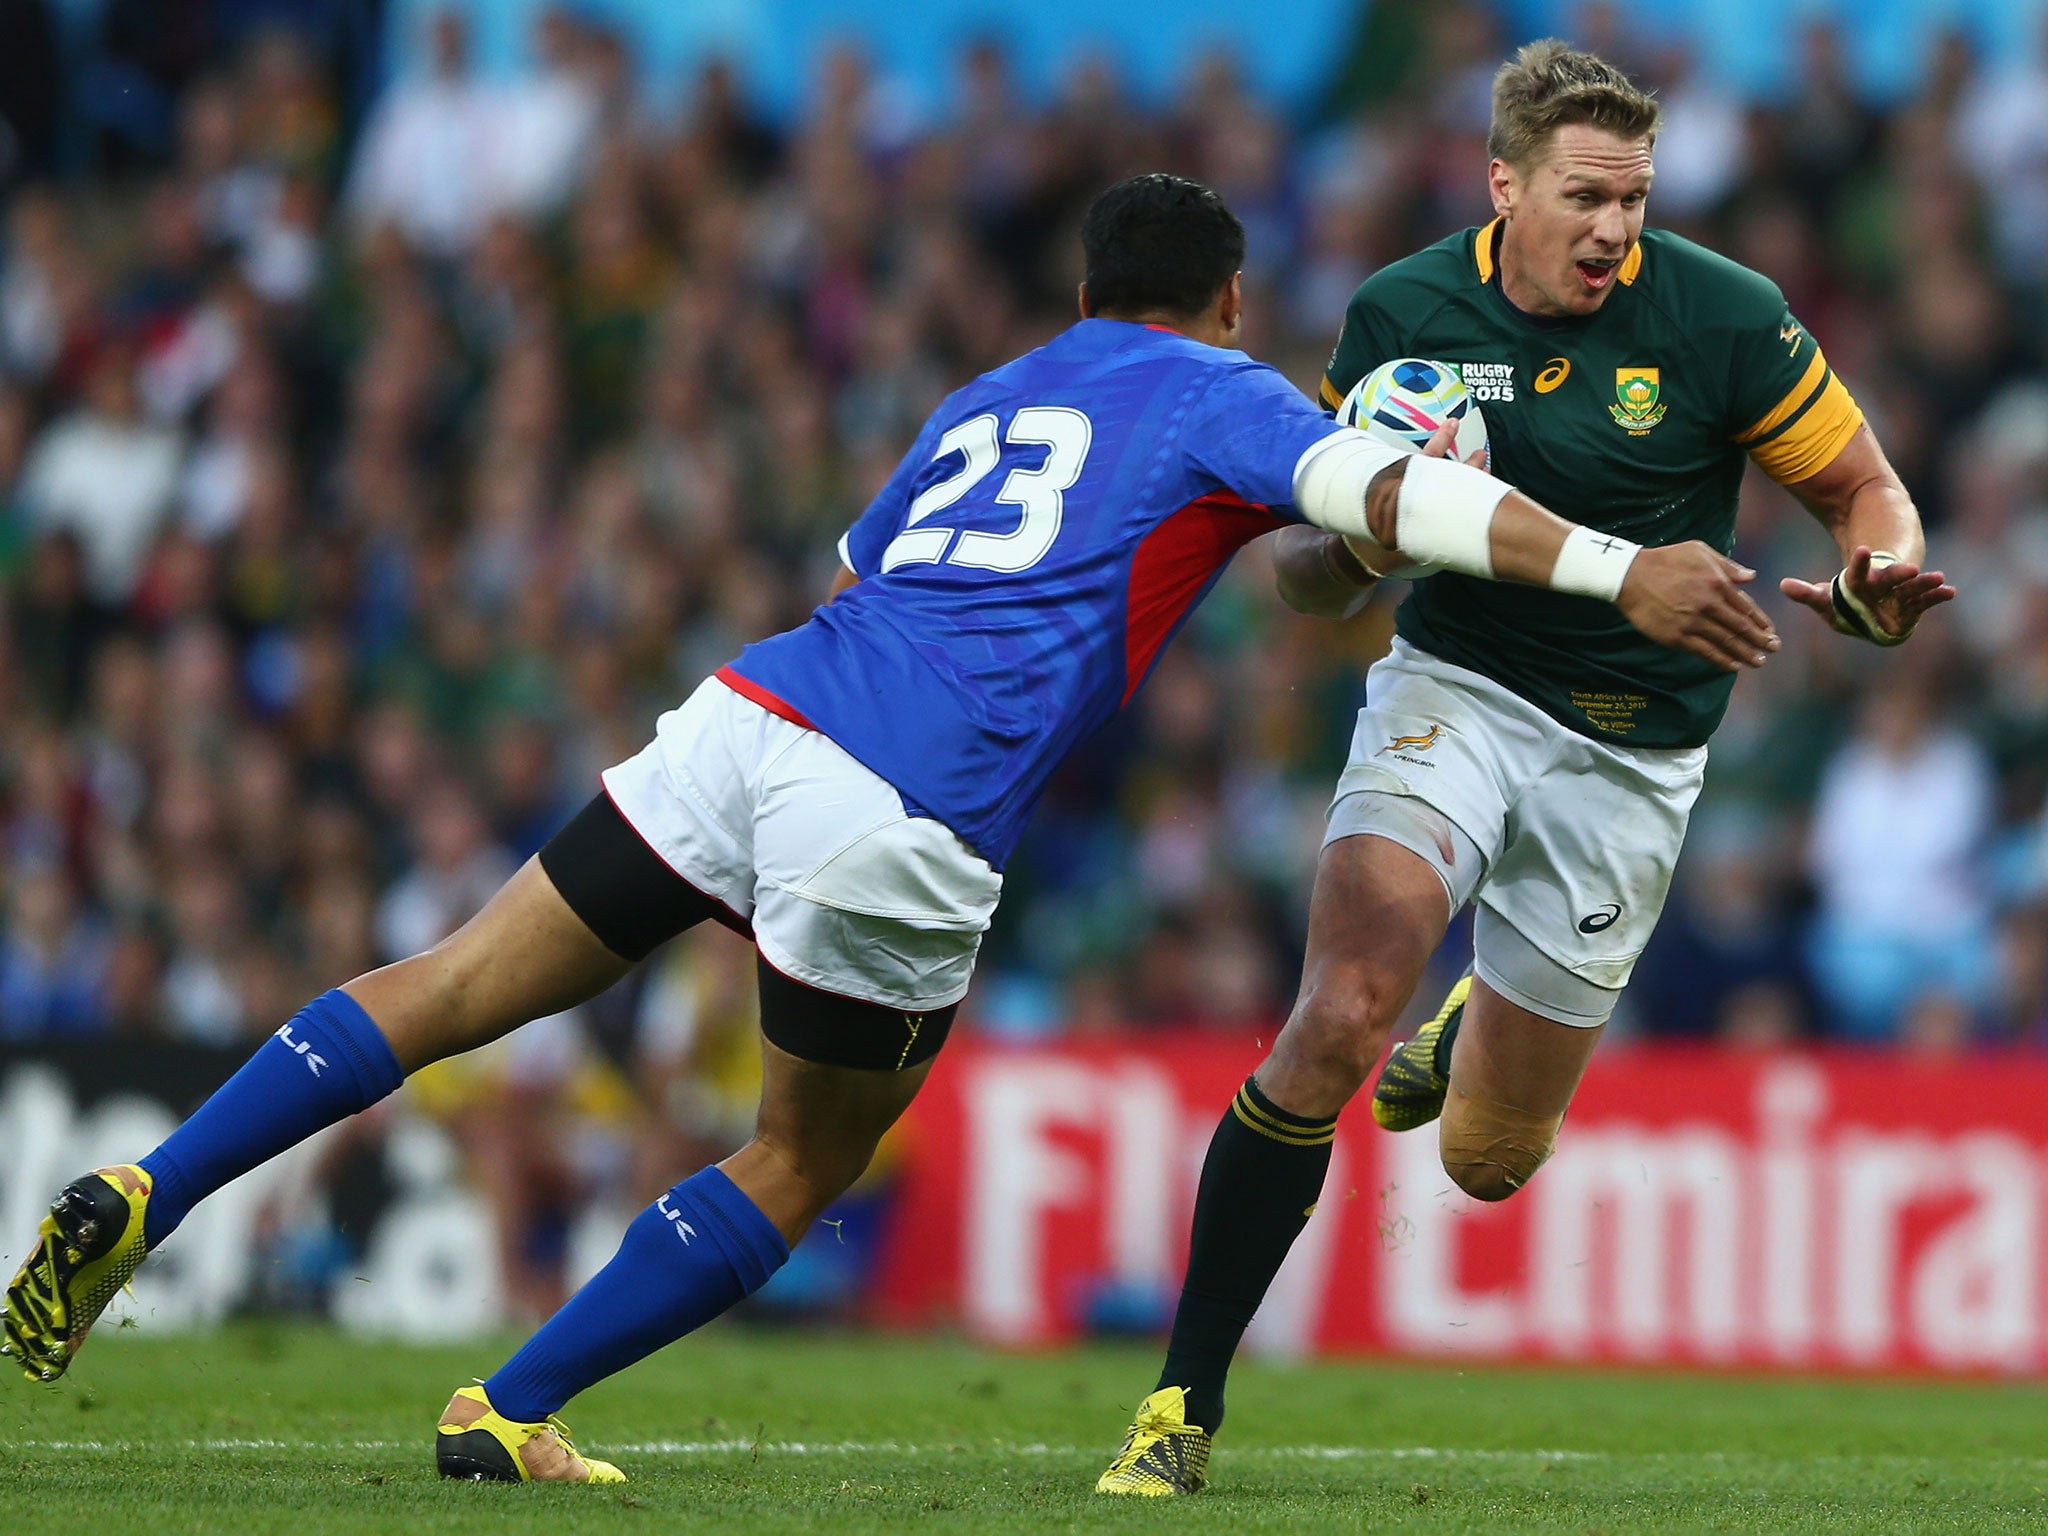 South Africa captain Jean de Villiers will miss the rest of the Rugby World Cup with a broken jaw